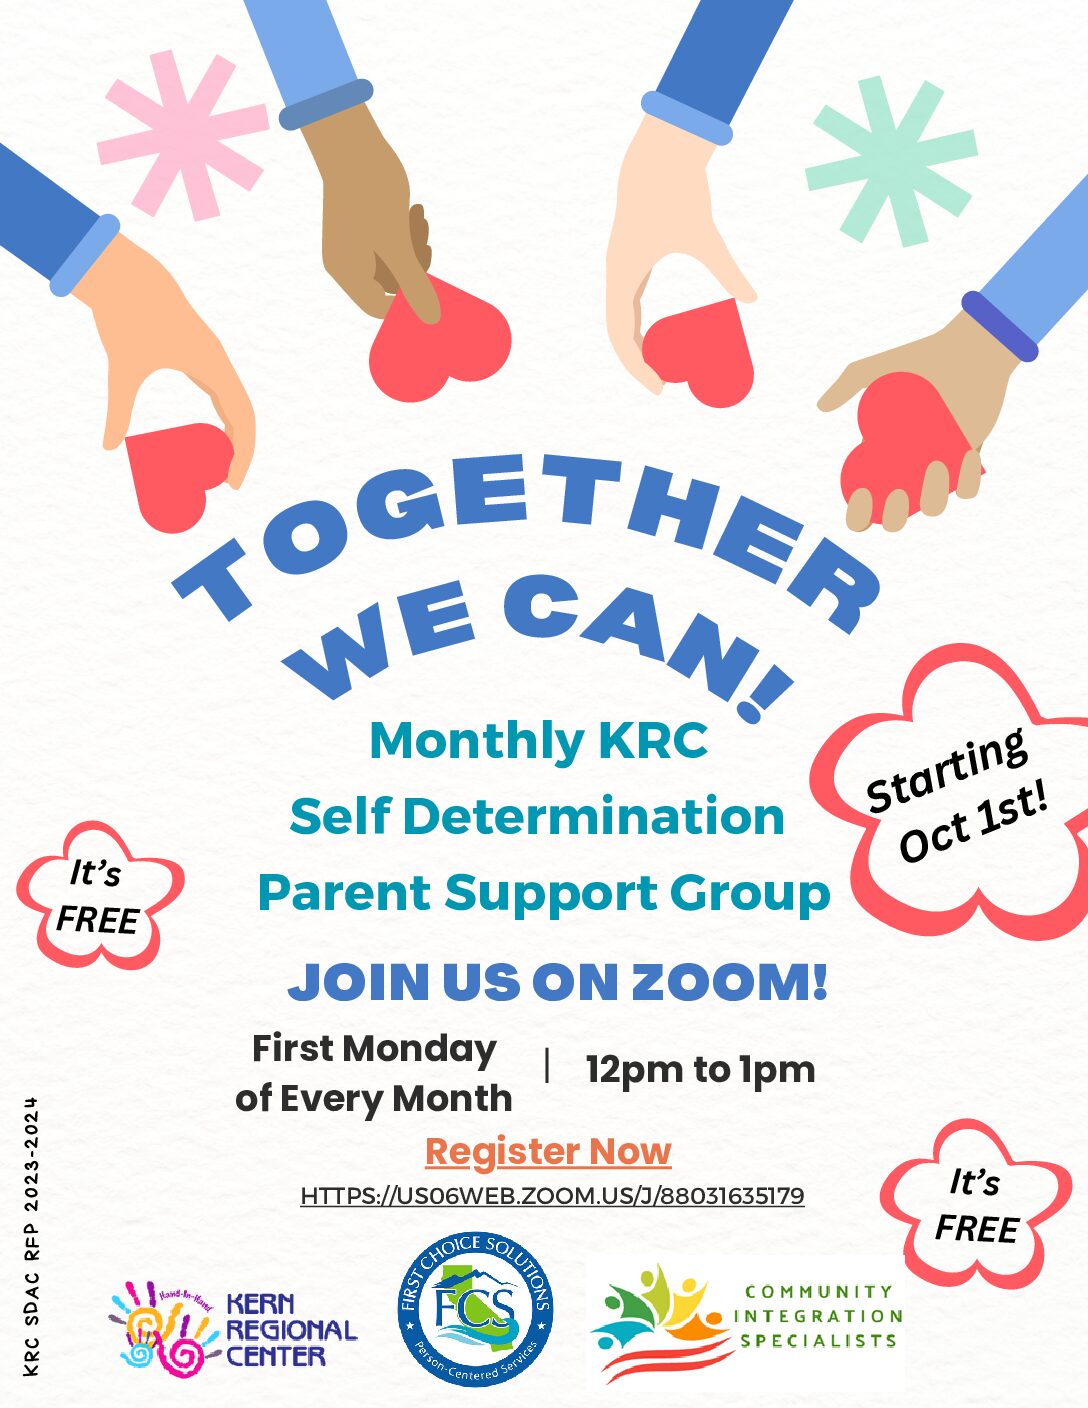 Monthly KRC Self Determination Parent Support Group